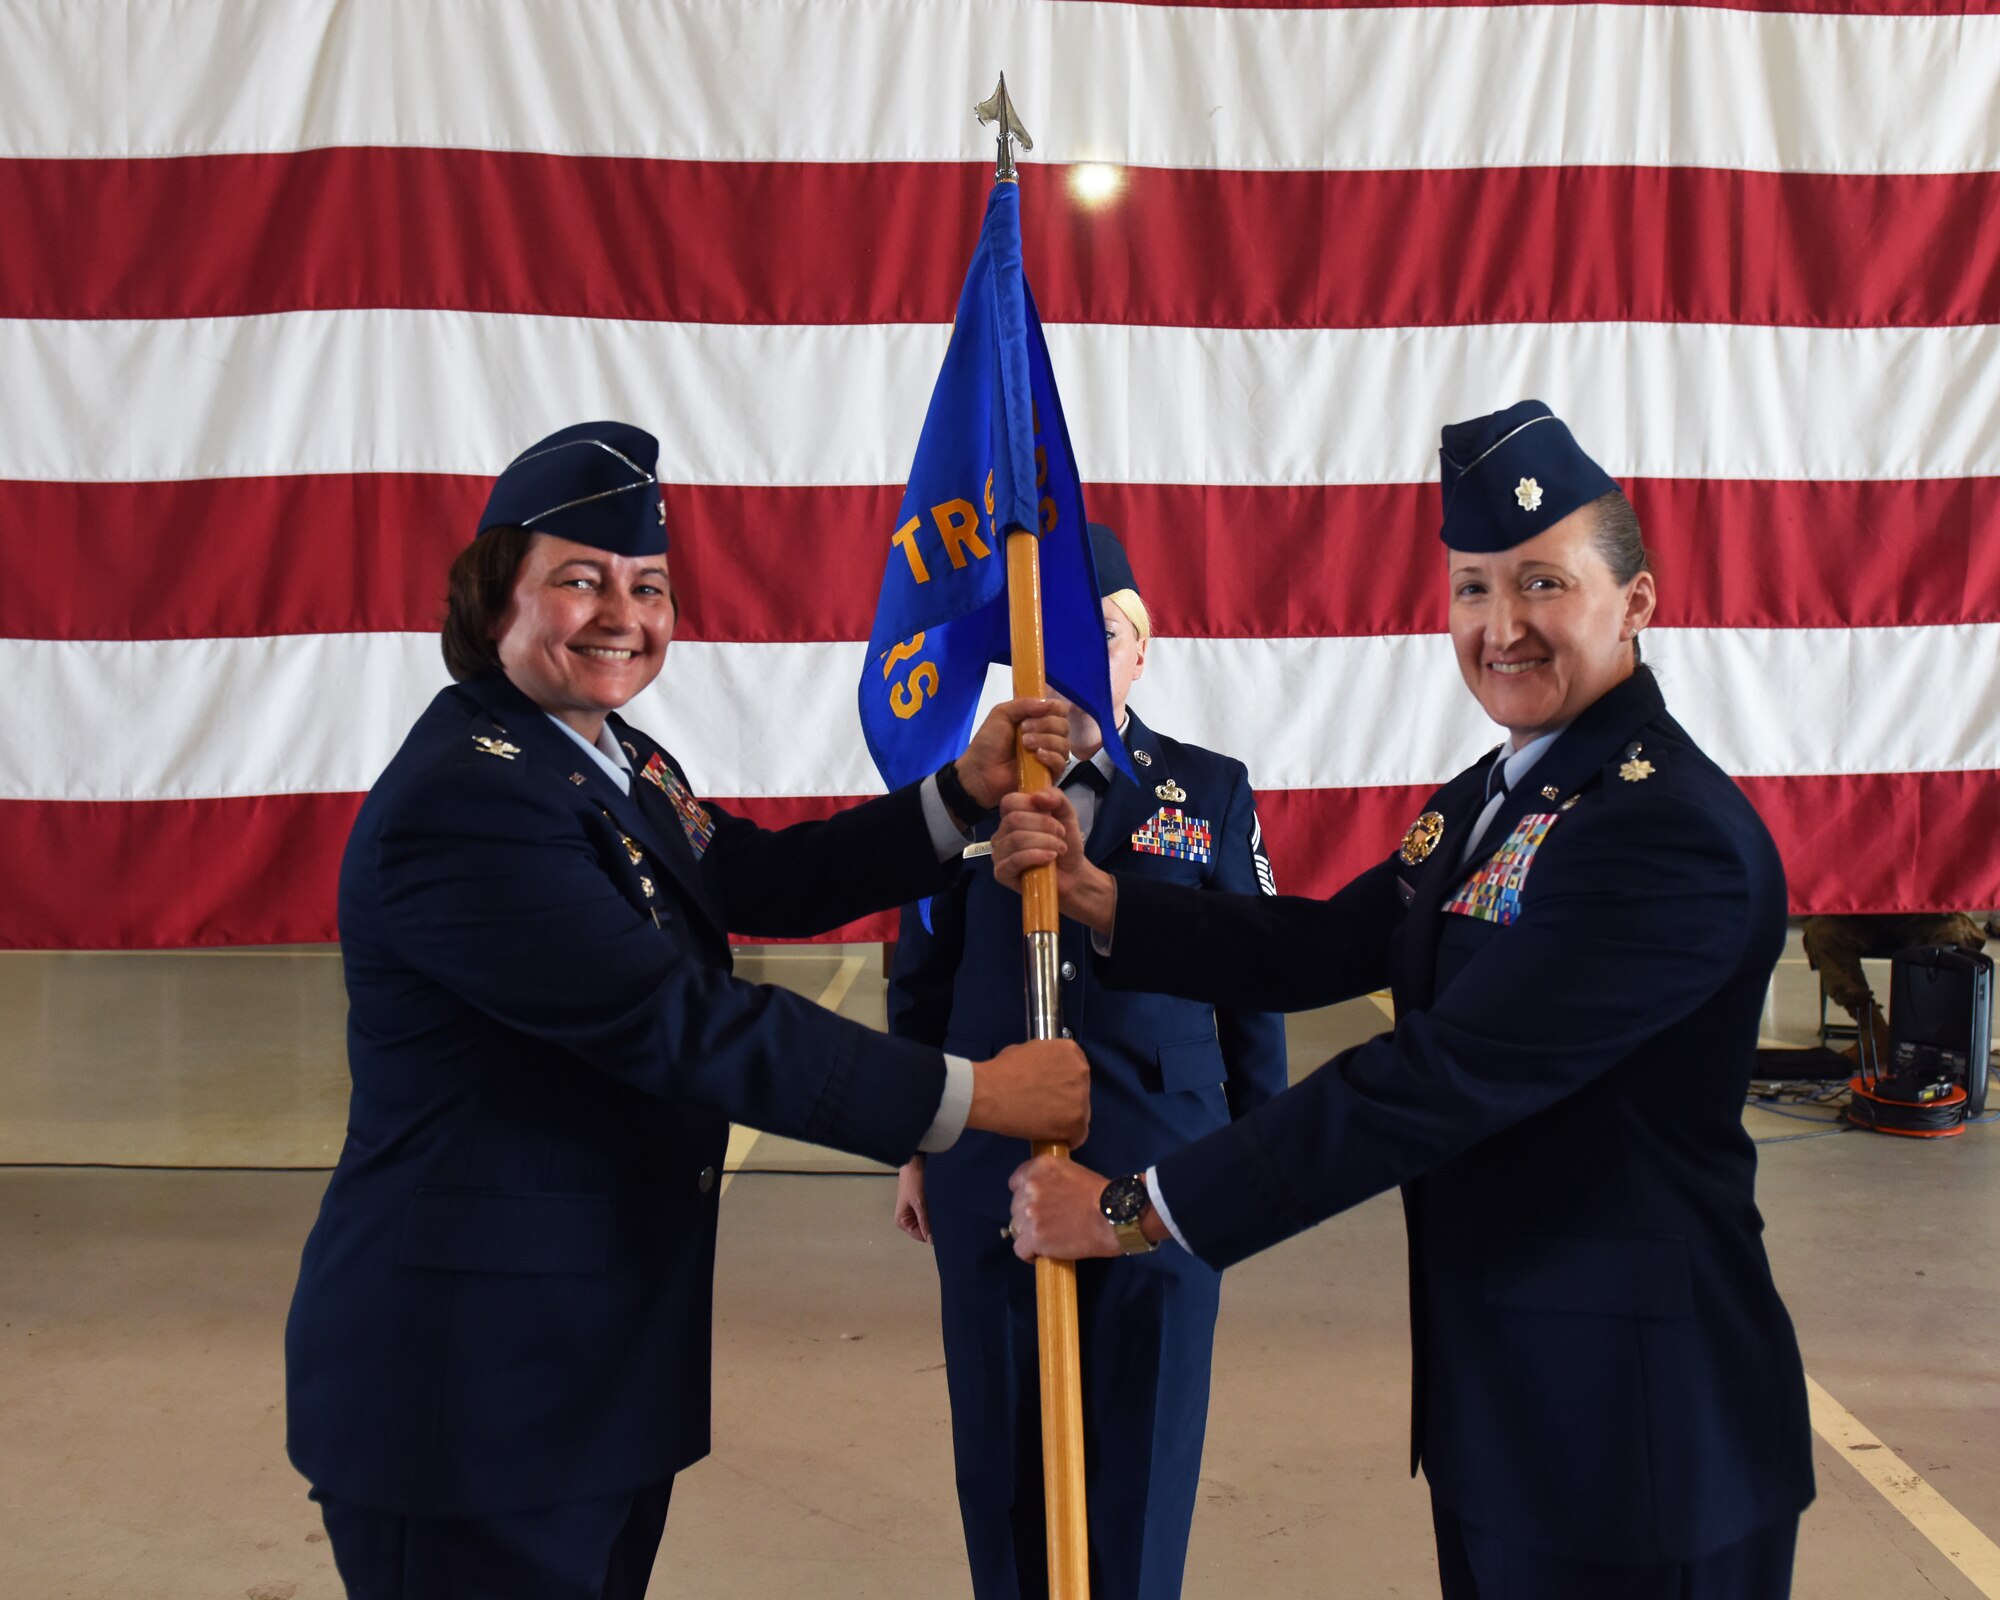 U.S. Air Force Lt. Col. Liane Zivitski, right, 315th Training Squadron incoming commander, assumes command from Col. Angelina Maguinness, 17th Training Group commander, during the 315th TRS change of command ceremony at Goodfellow Air Force Base, Texas, June 10, 2022. Change of commands are a military tradition representing the transfer of responsibilities from the presiding official to the incoming official. (U.S. Air Force photo by Airman 1st Class Zachary Heimbuch)